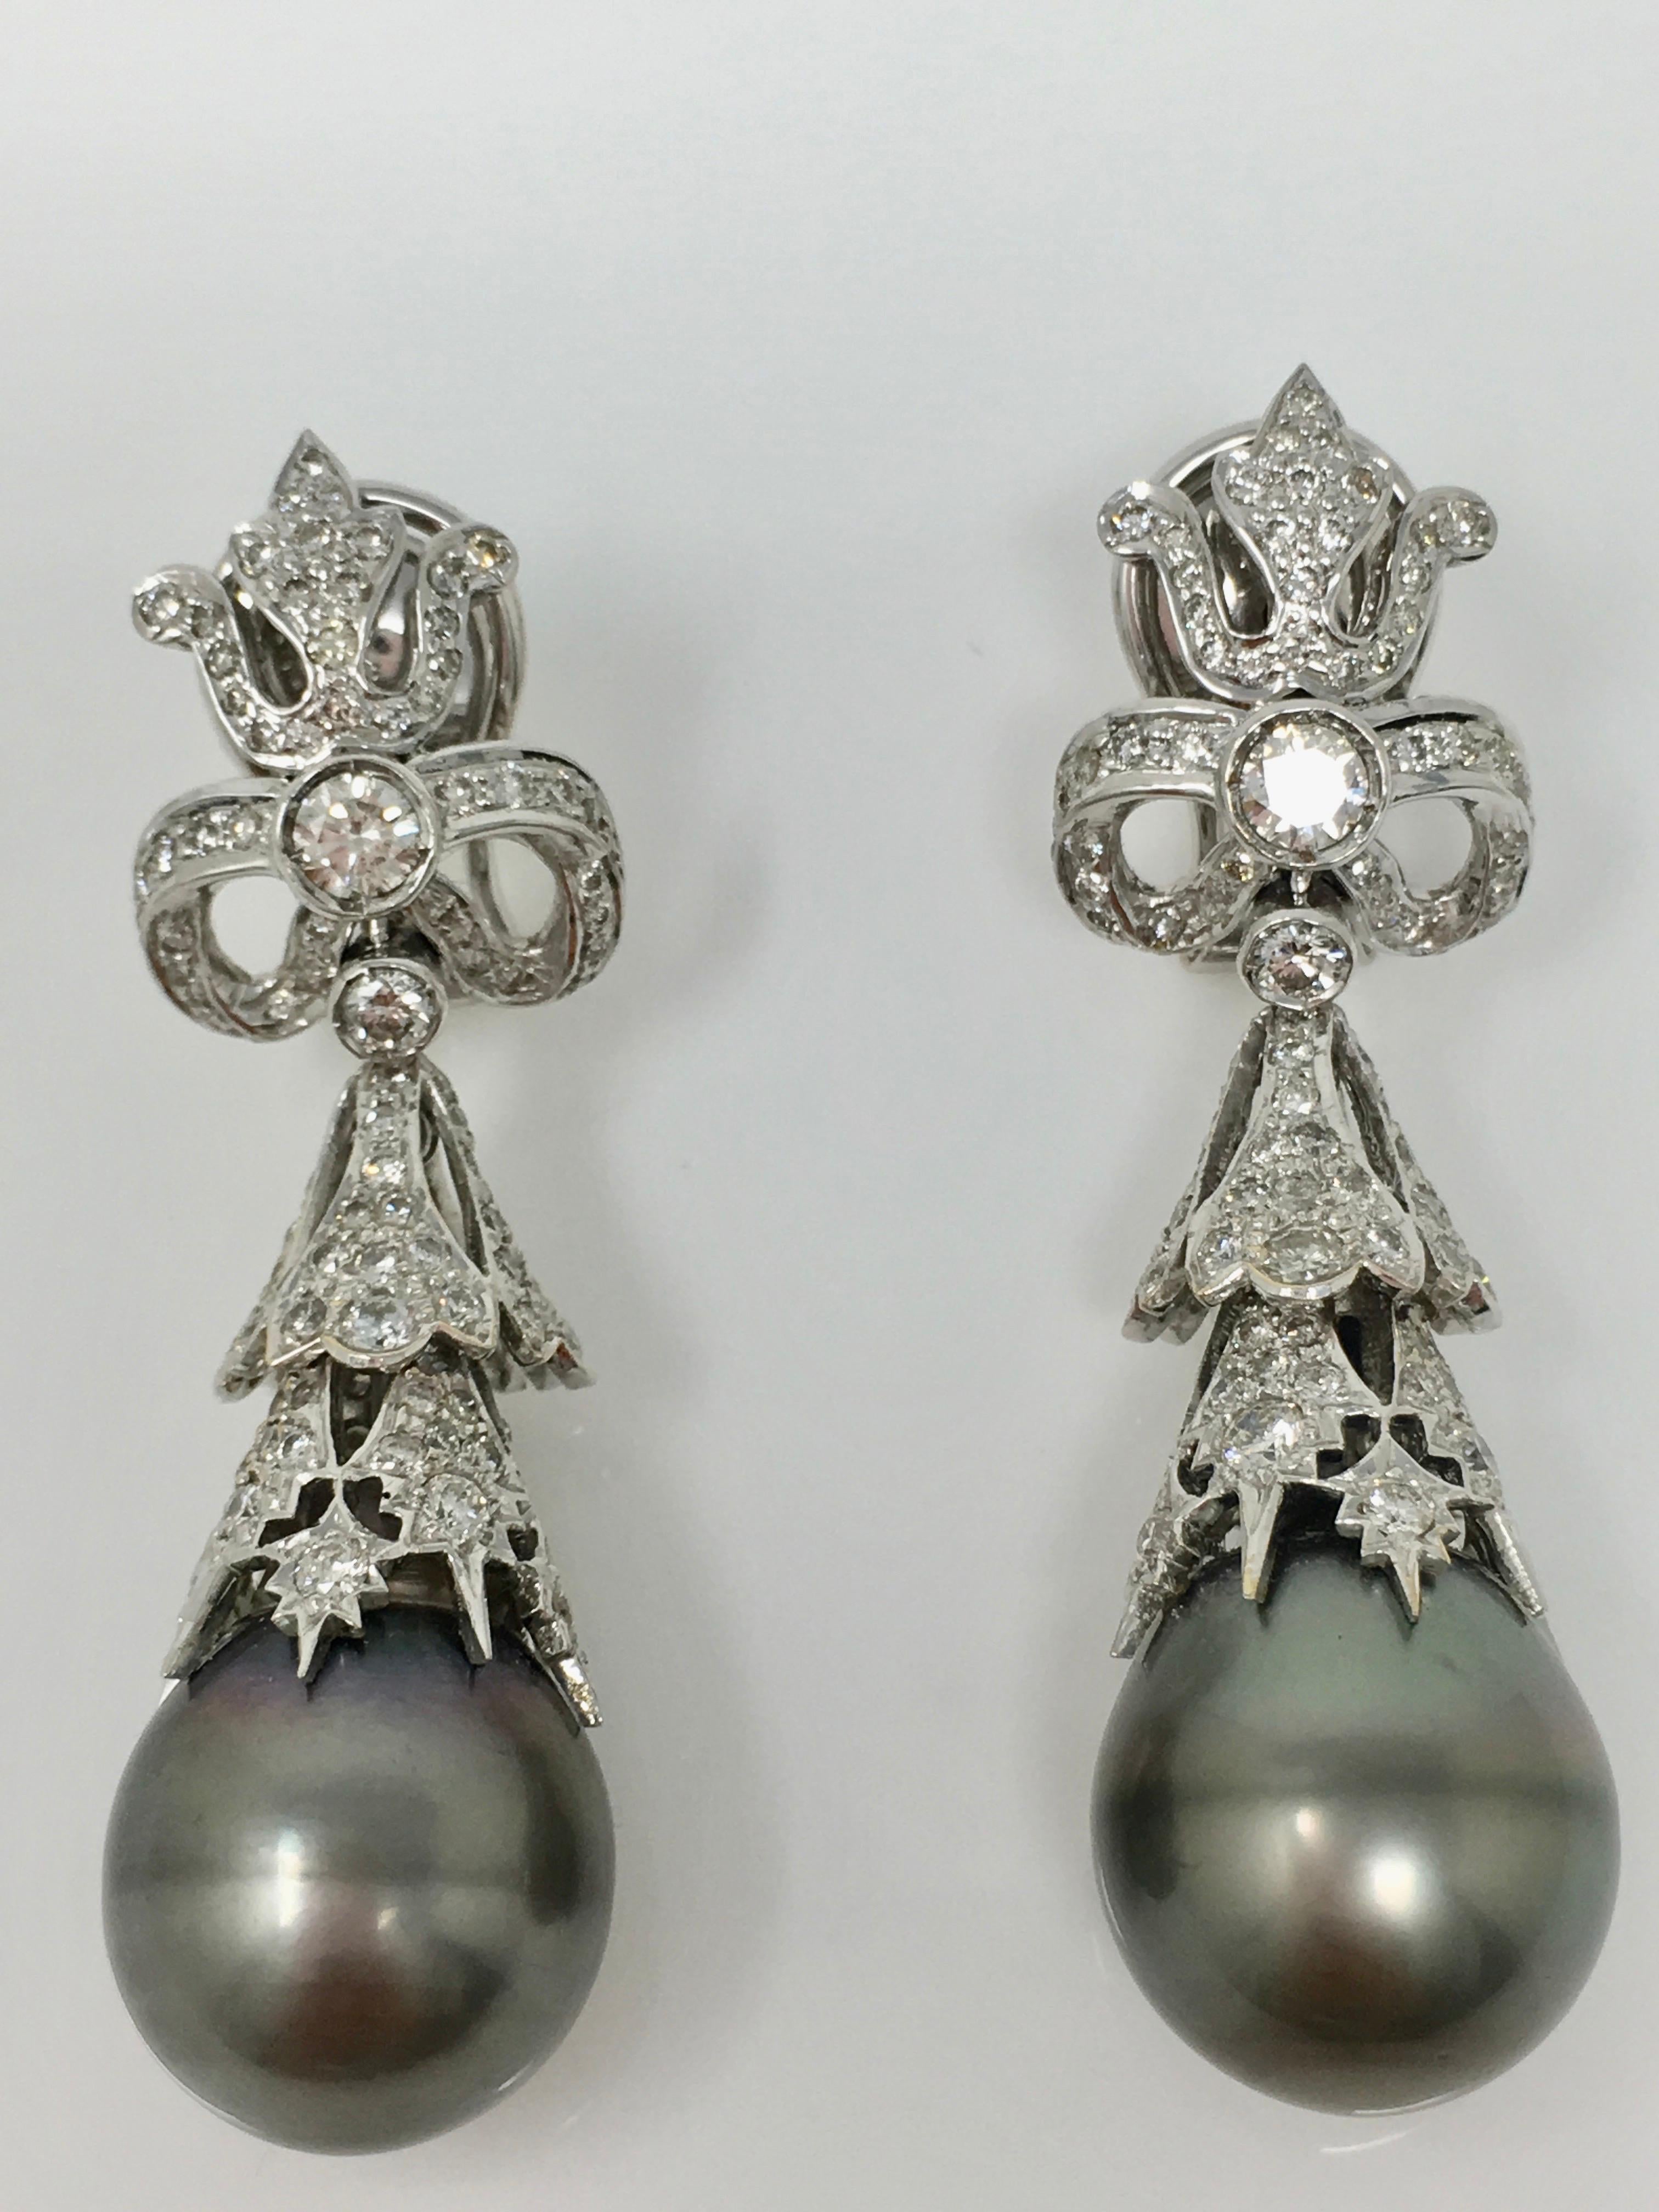 This gorgeous and unique chandelier earrings by Moguldiam Inc features 3.76 carat of white round brilliant diamond with VS clarity and GH color and grey two south sea pearls with beautiful lusture and quality of 14.5mm by 15.5mm each. This wonderful